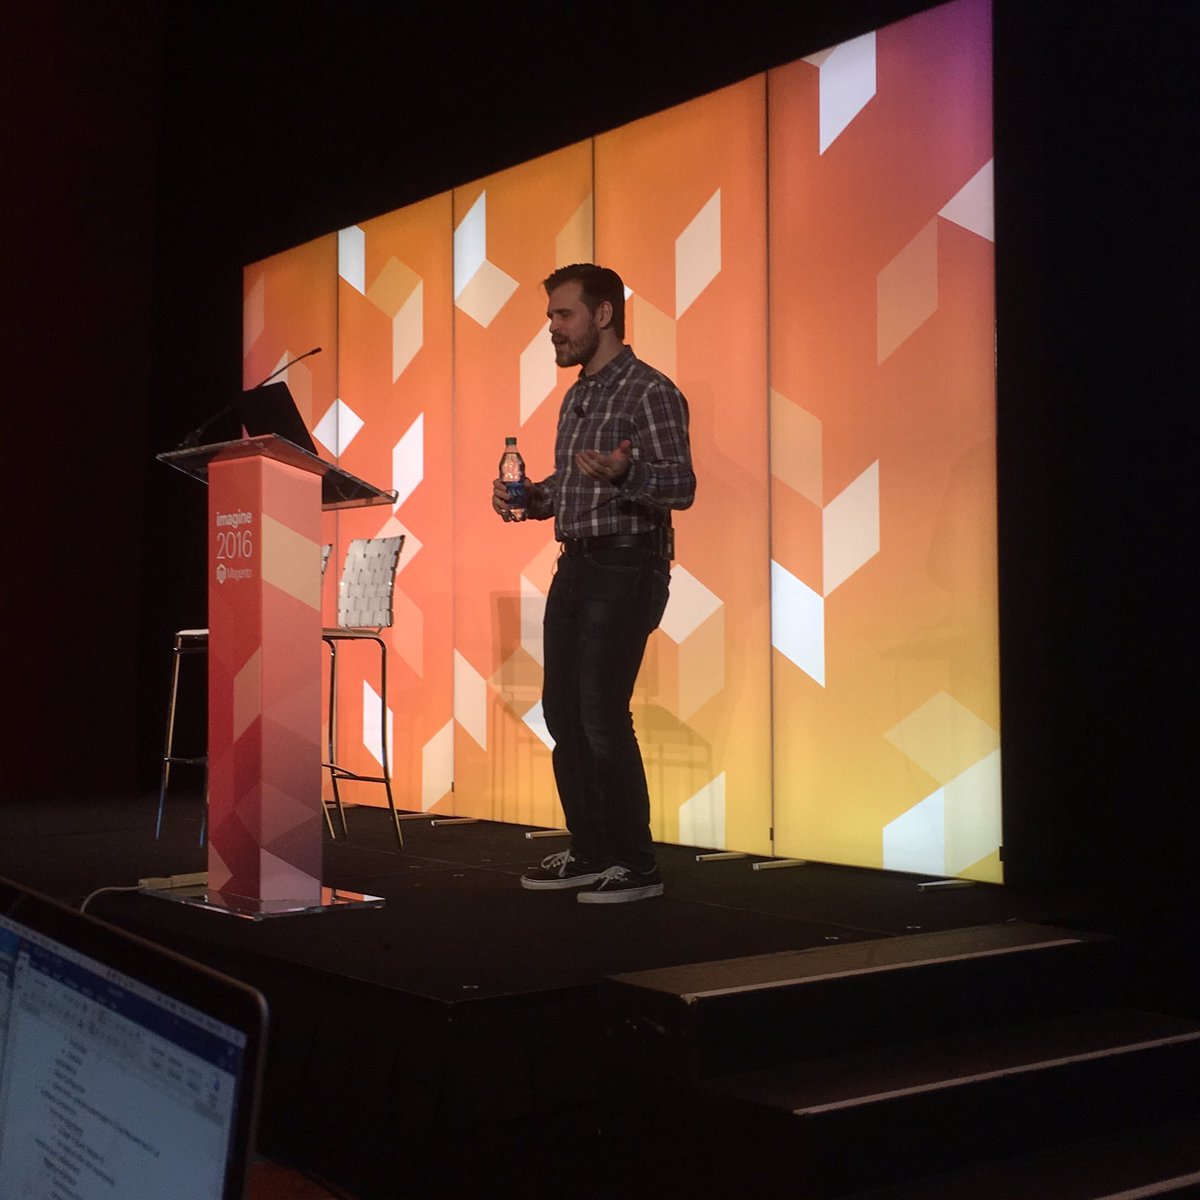 monocat: Learning what it takes 2 gather requirements 4 Magento implementation from d master @SteveAtMagento #MagentoImagine https://t.co/ZEHi4igTe7